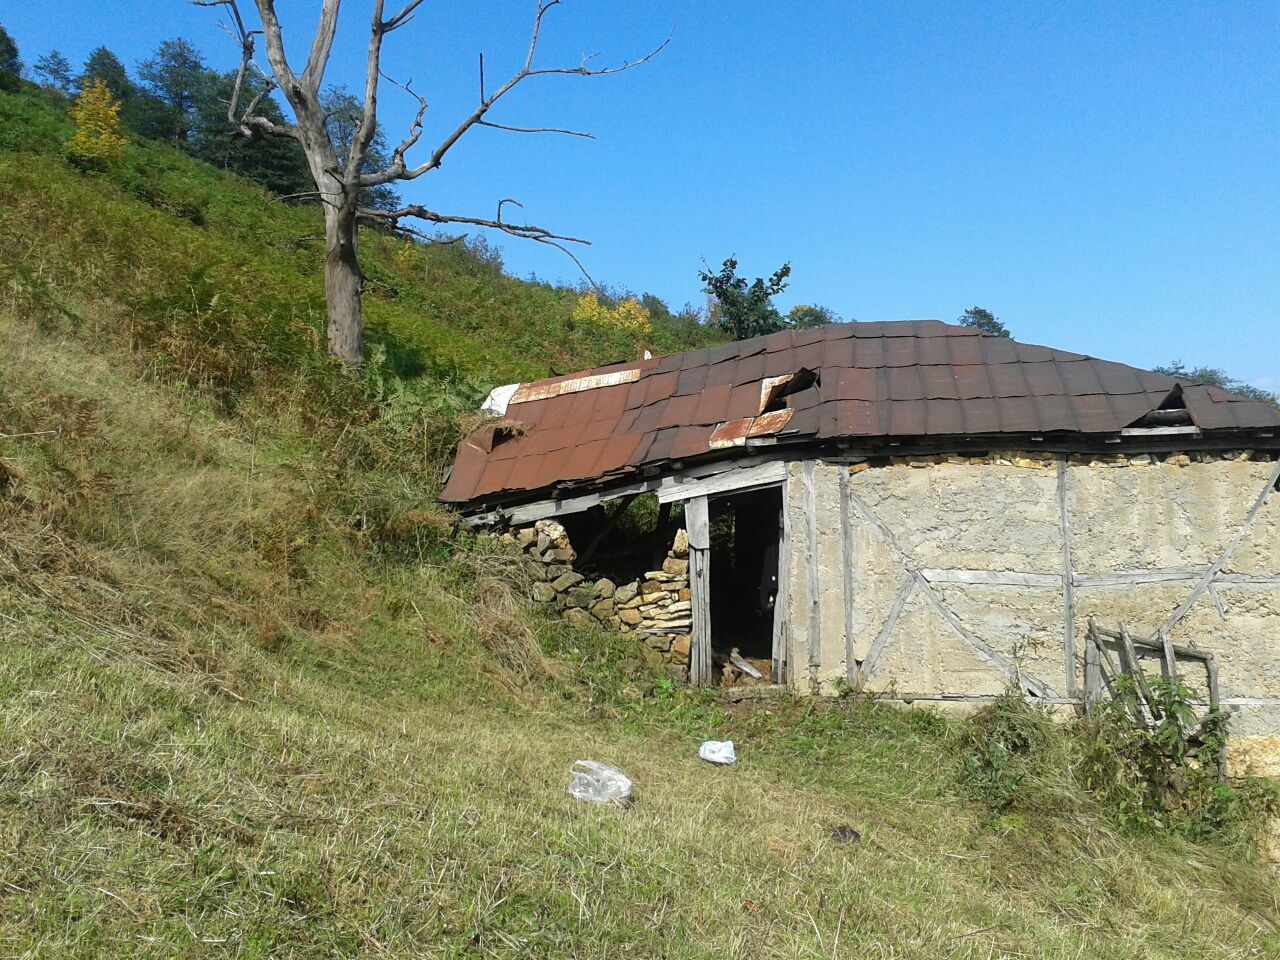 built structure, architecture, building exterior, clear sky, abandoned, grass, old, obsolete, damaged, house, blue, run-down, tree, deterioration, plant, copy space, field, sunlight, day, low angle view